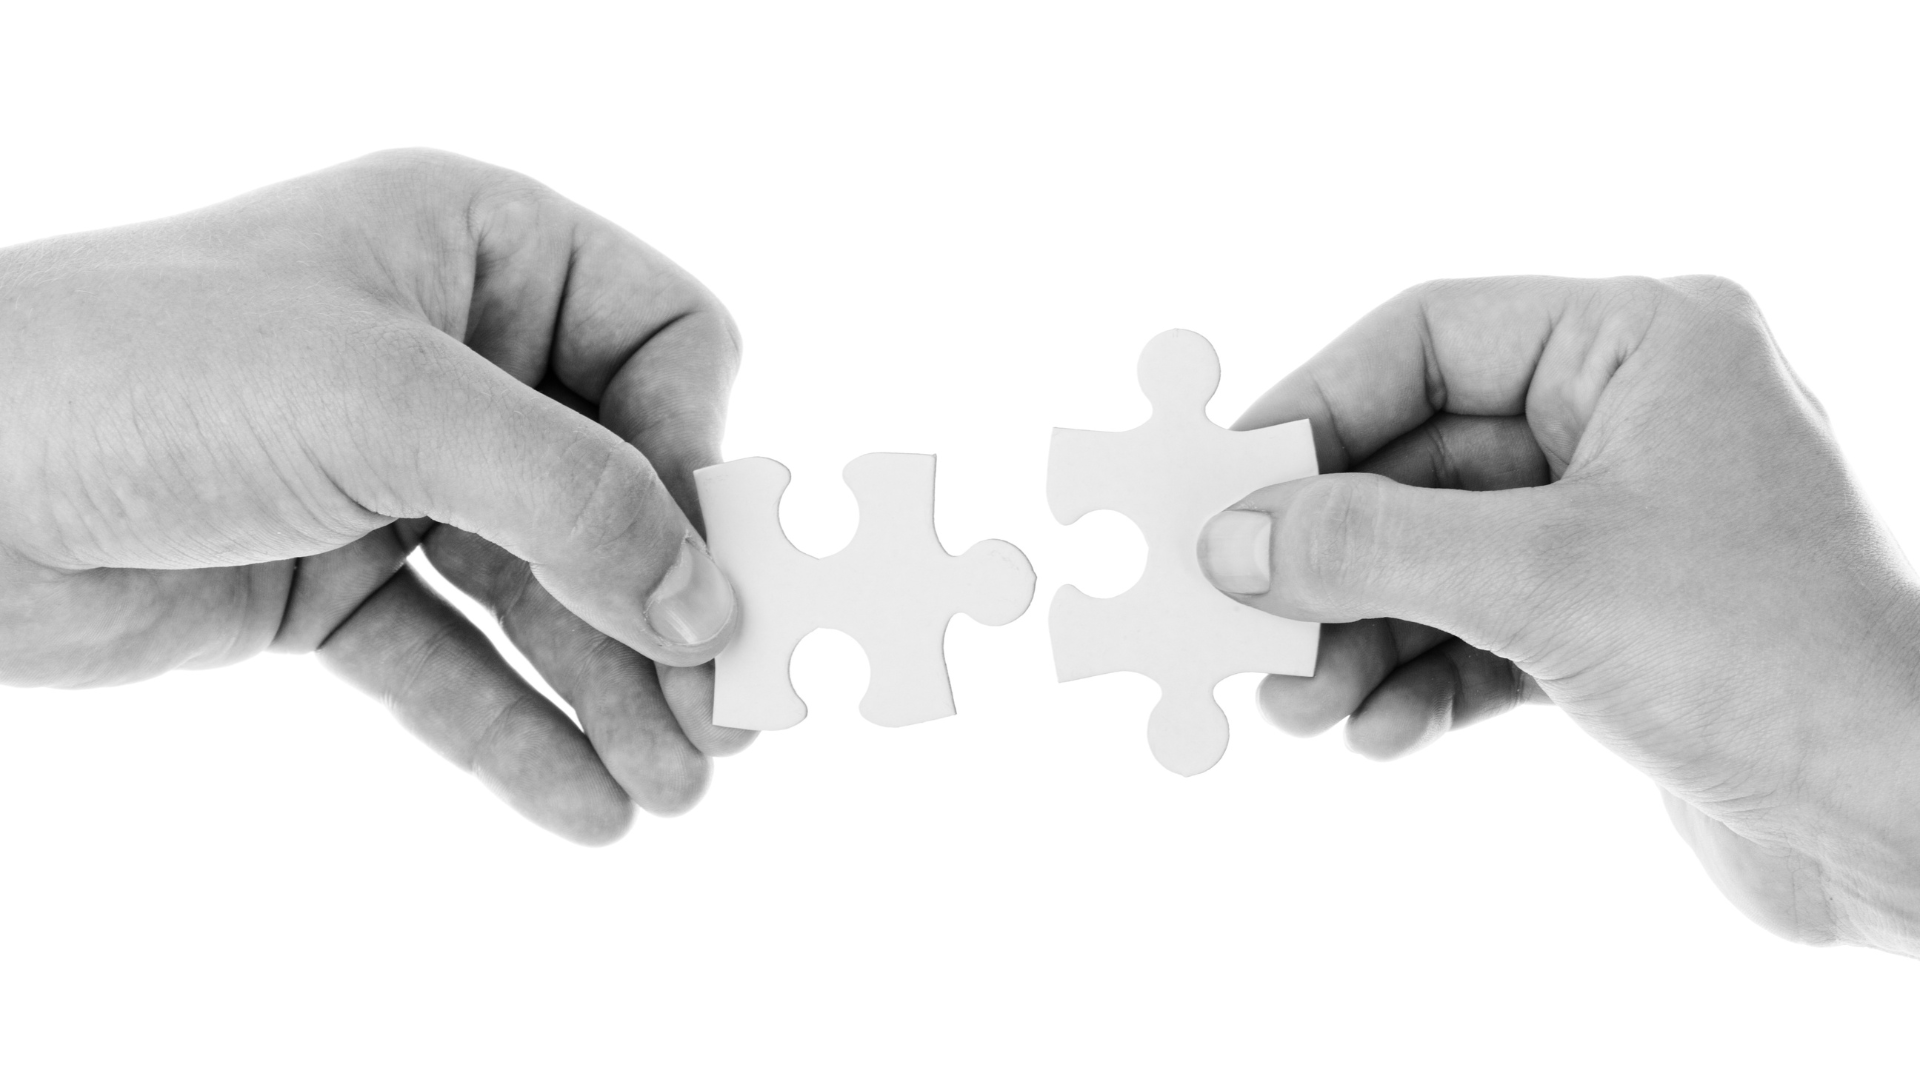 an image of puzzle pieces held by two people to depict working together